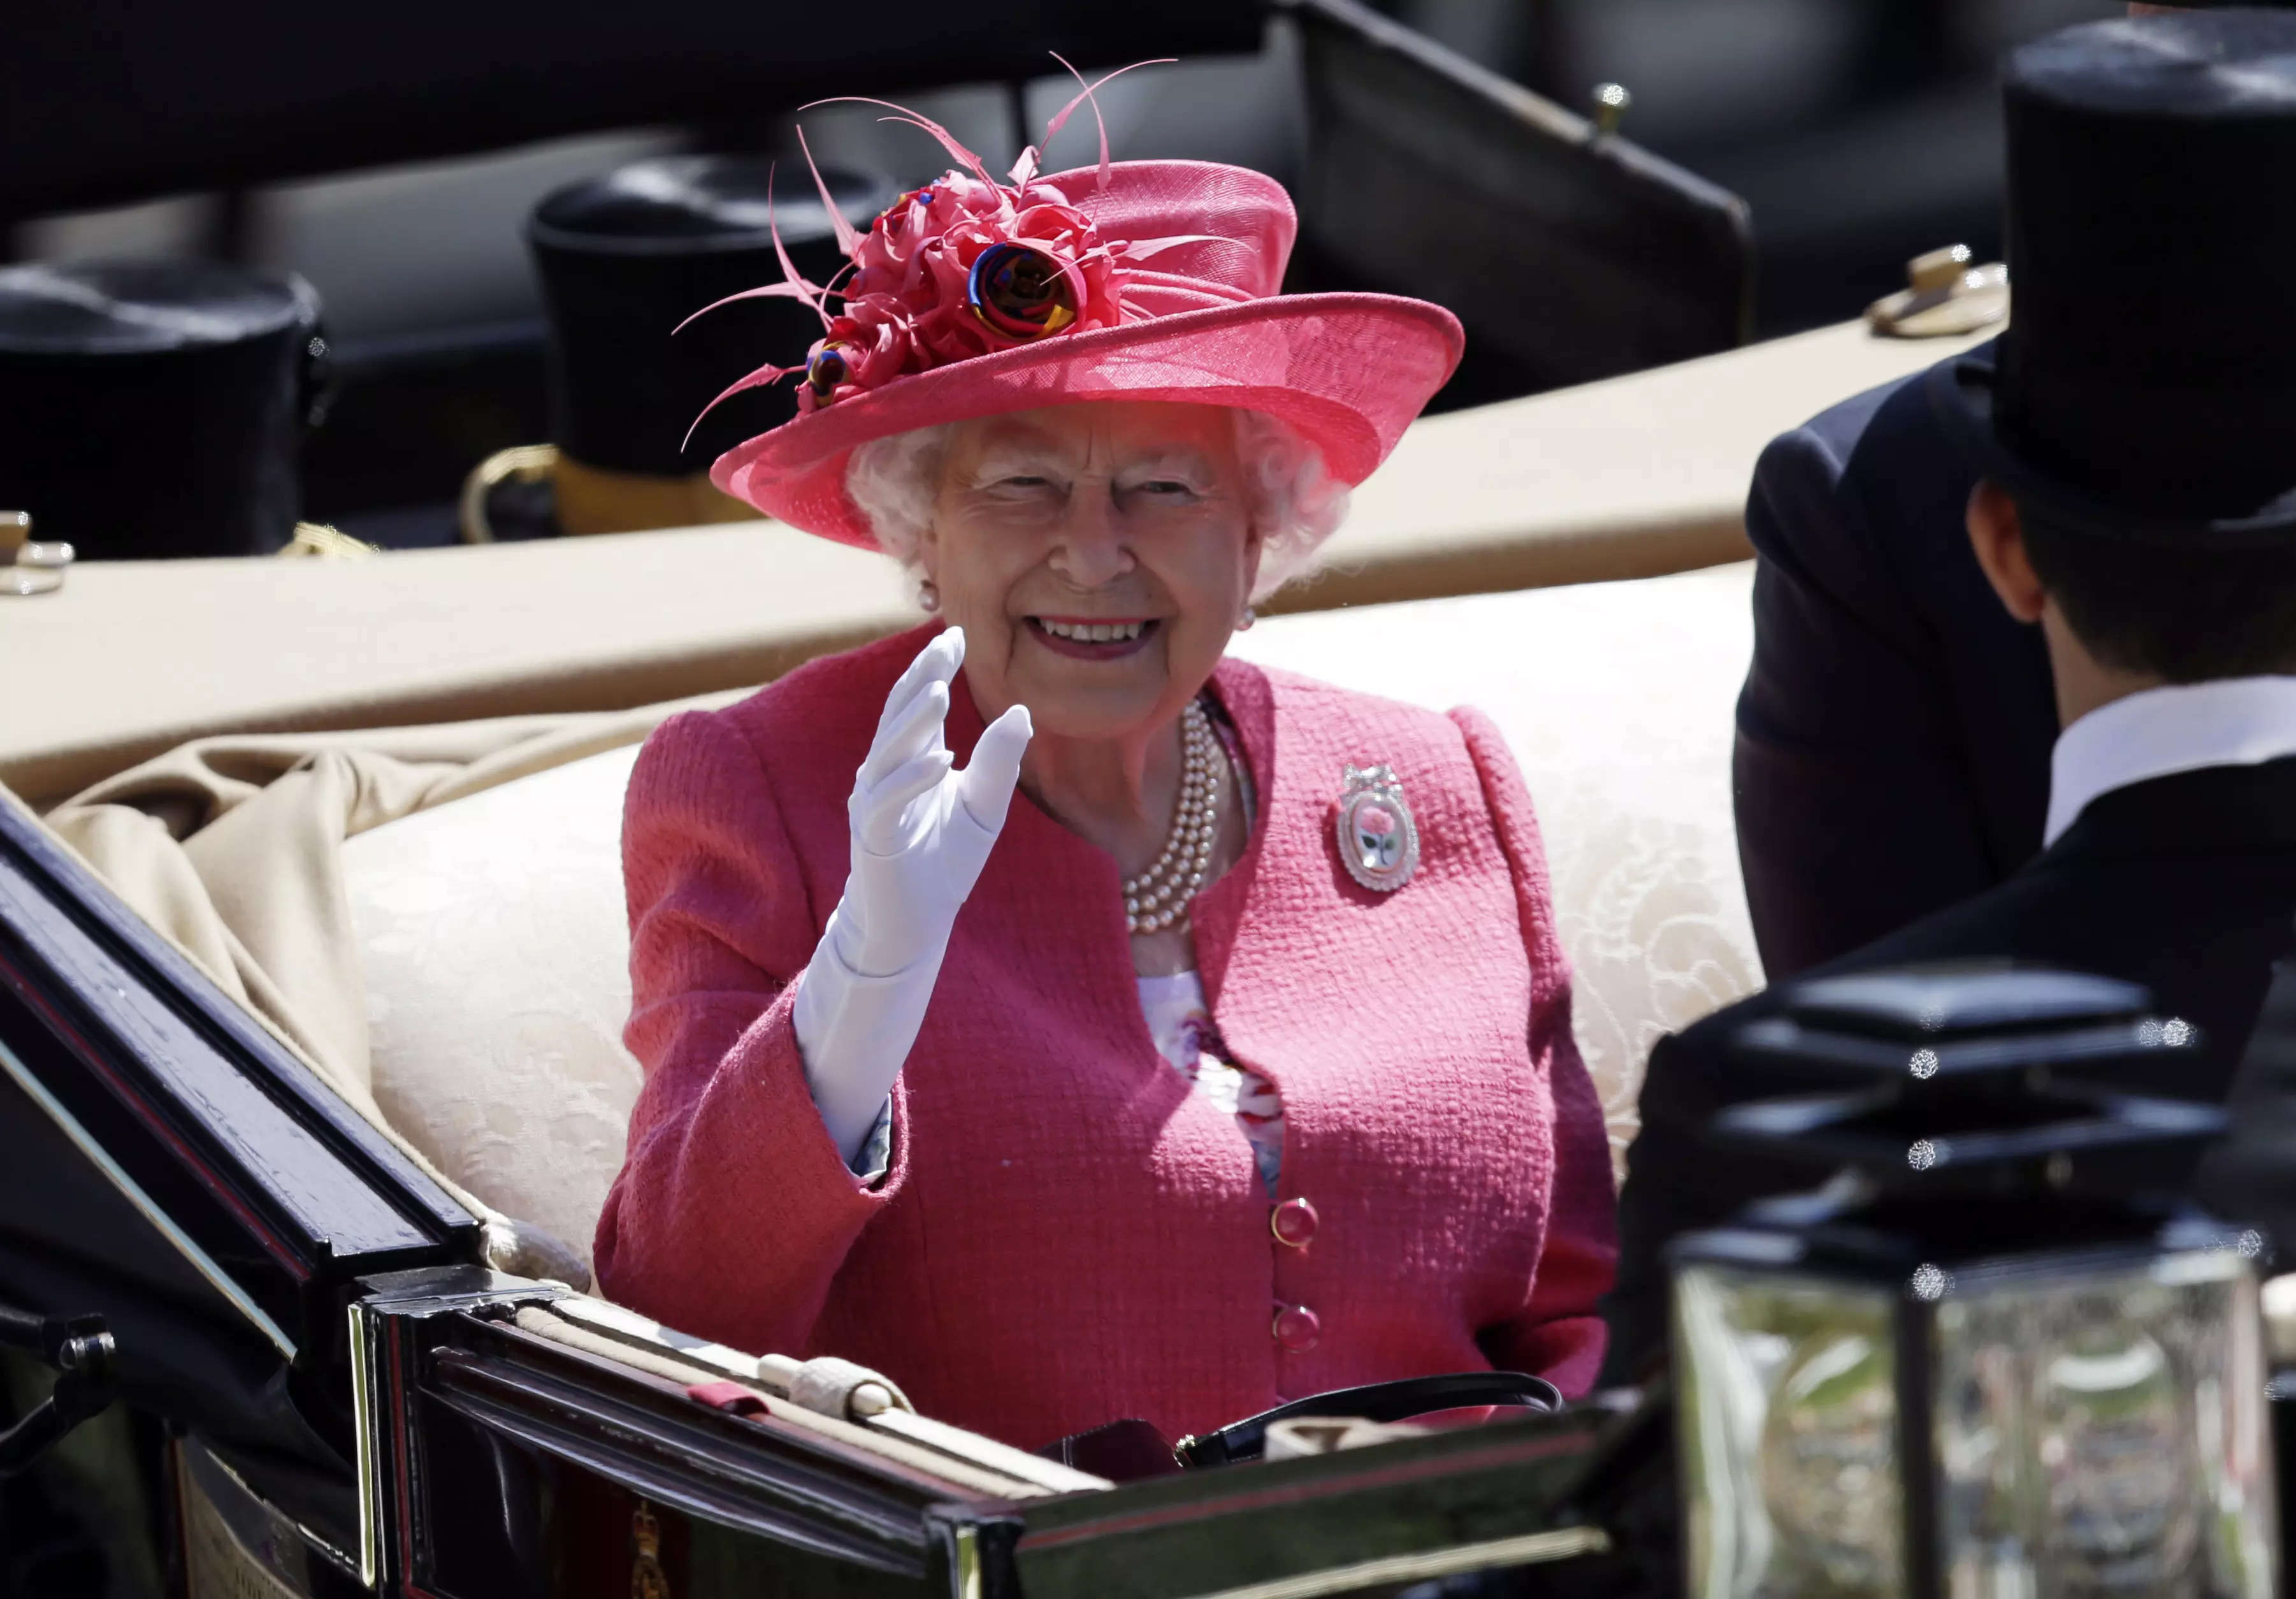 Britains Queen Elizabeth II to be laid to rest after massive state funeral on Sept 19 - All you need to know